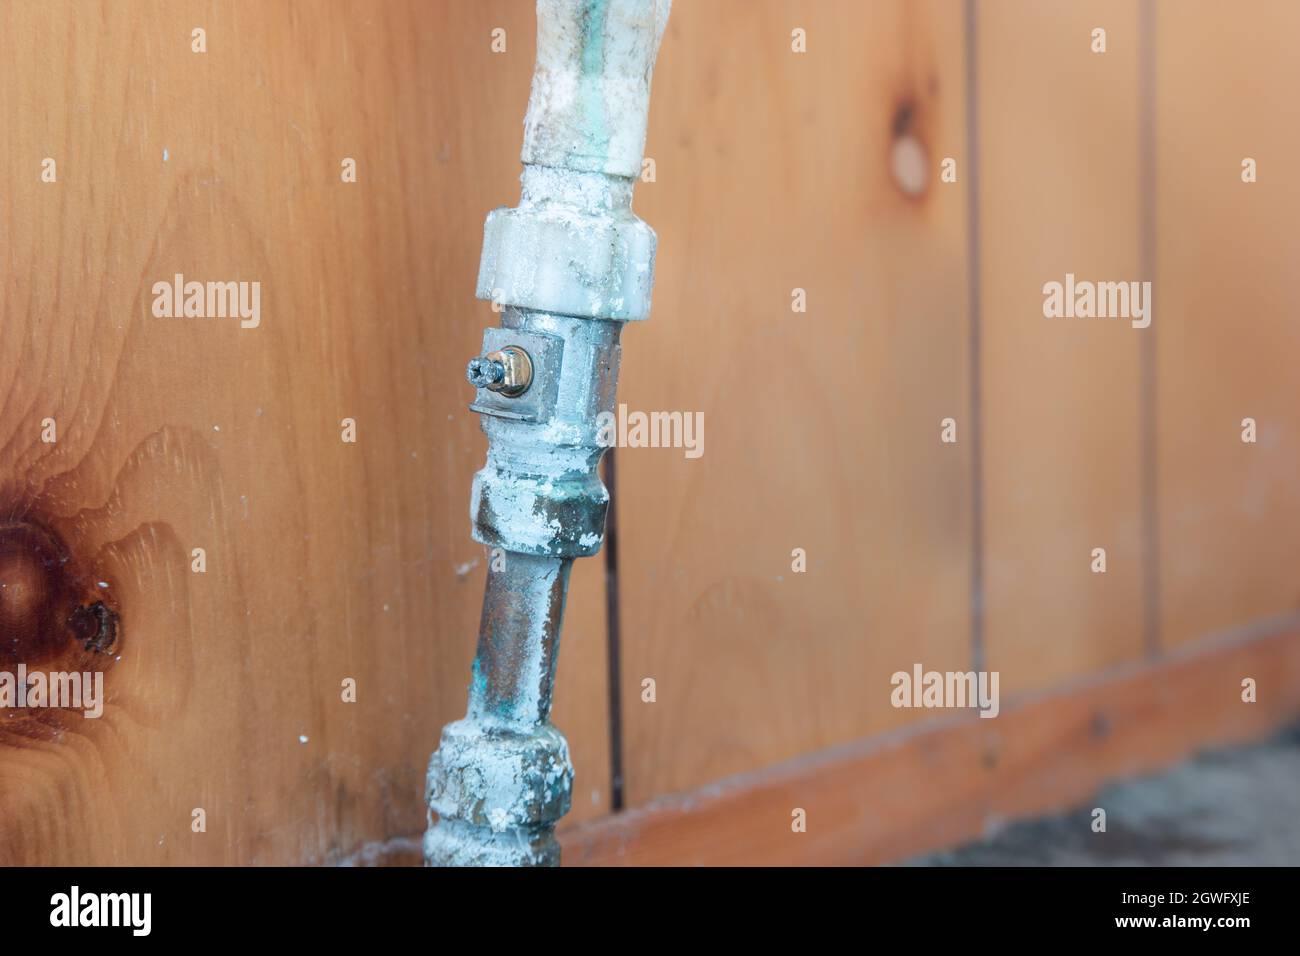 Old leaking pipe with broken isolation valve screw, compression tap fitting, showing water and limescale damage Stock Photo